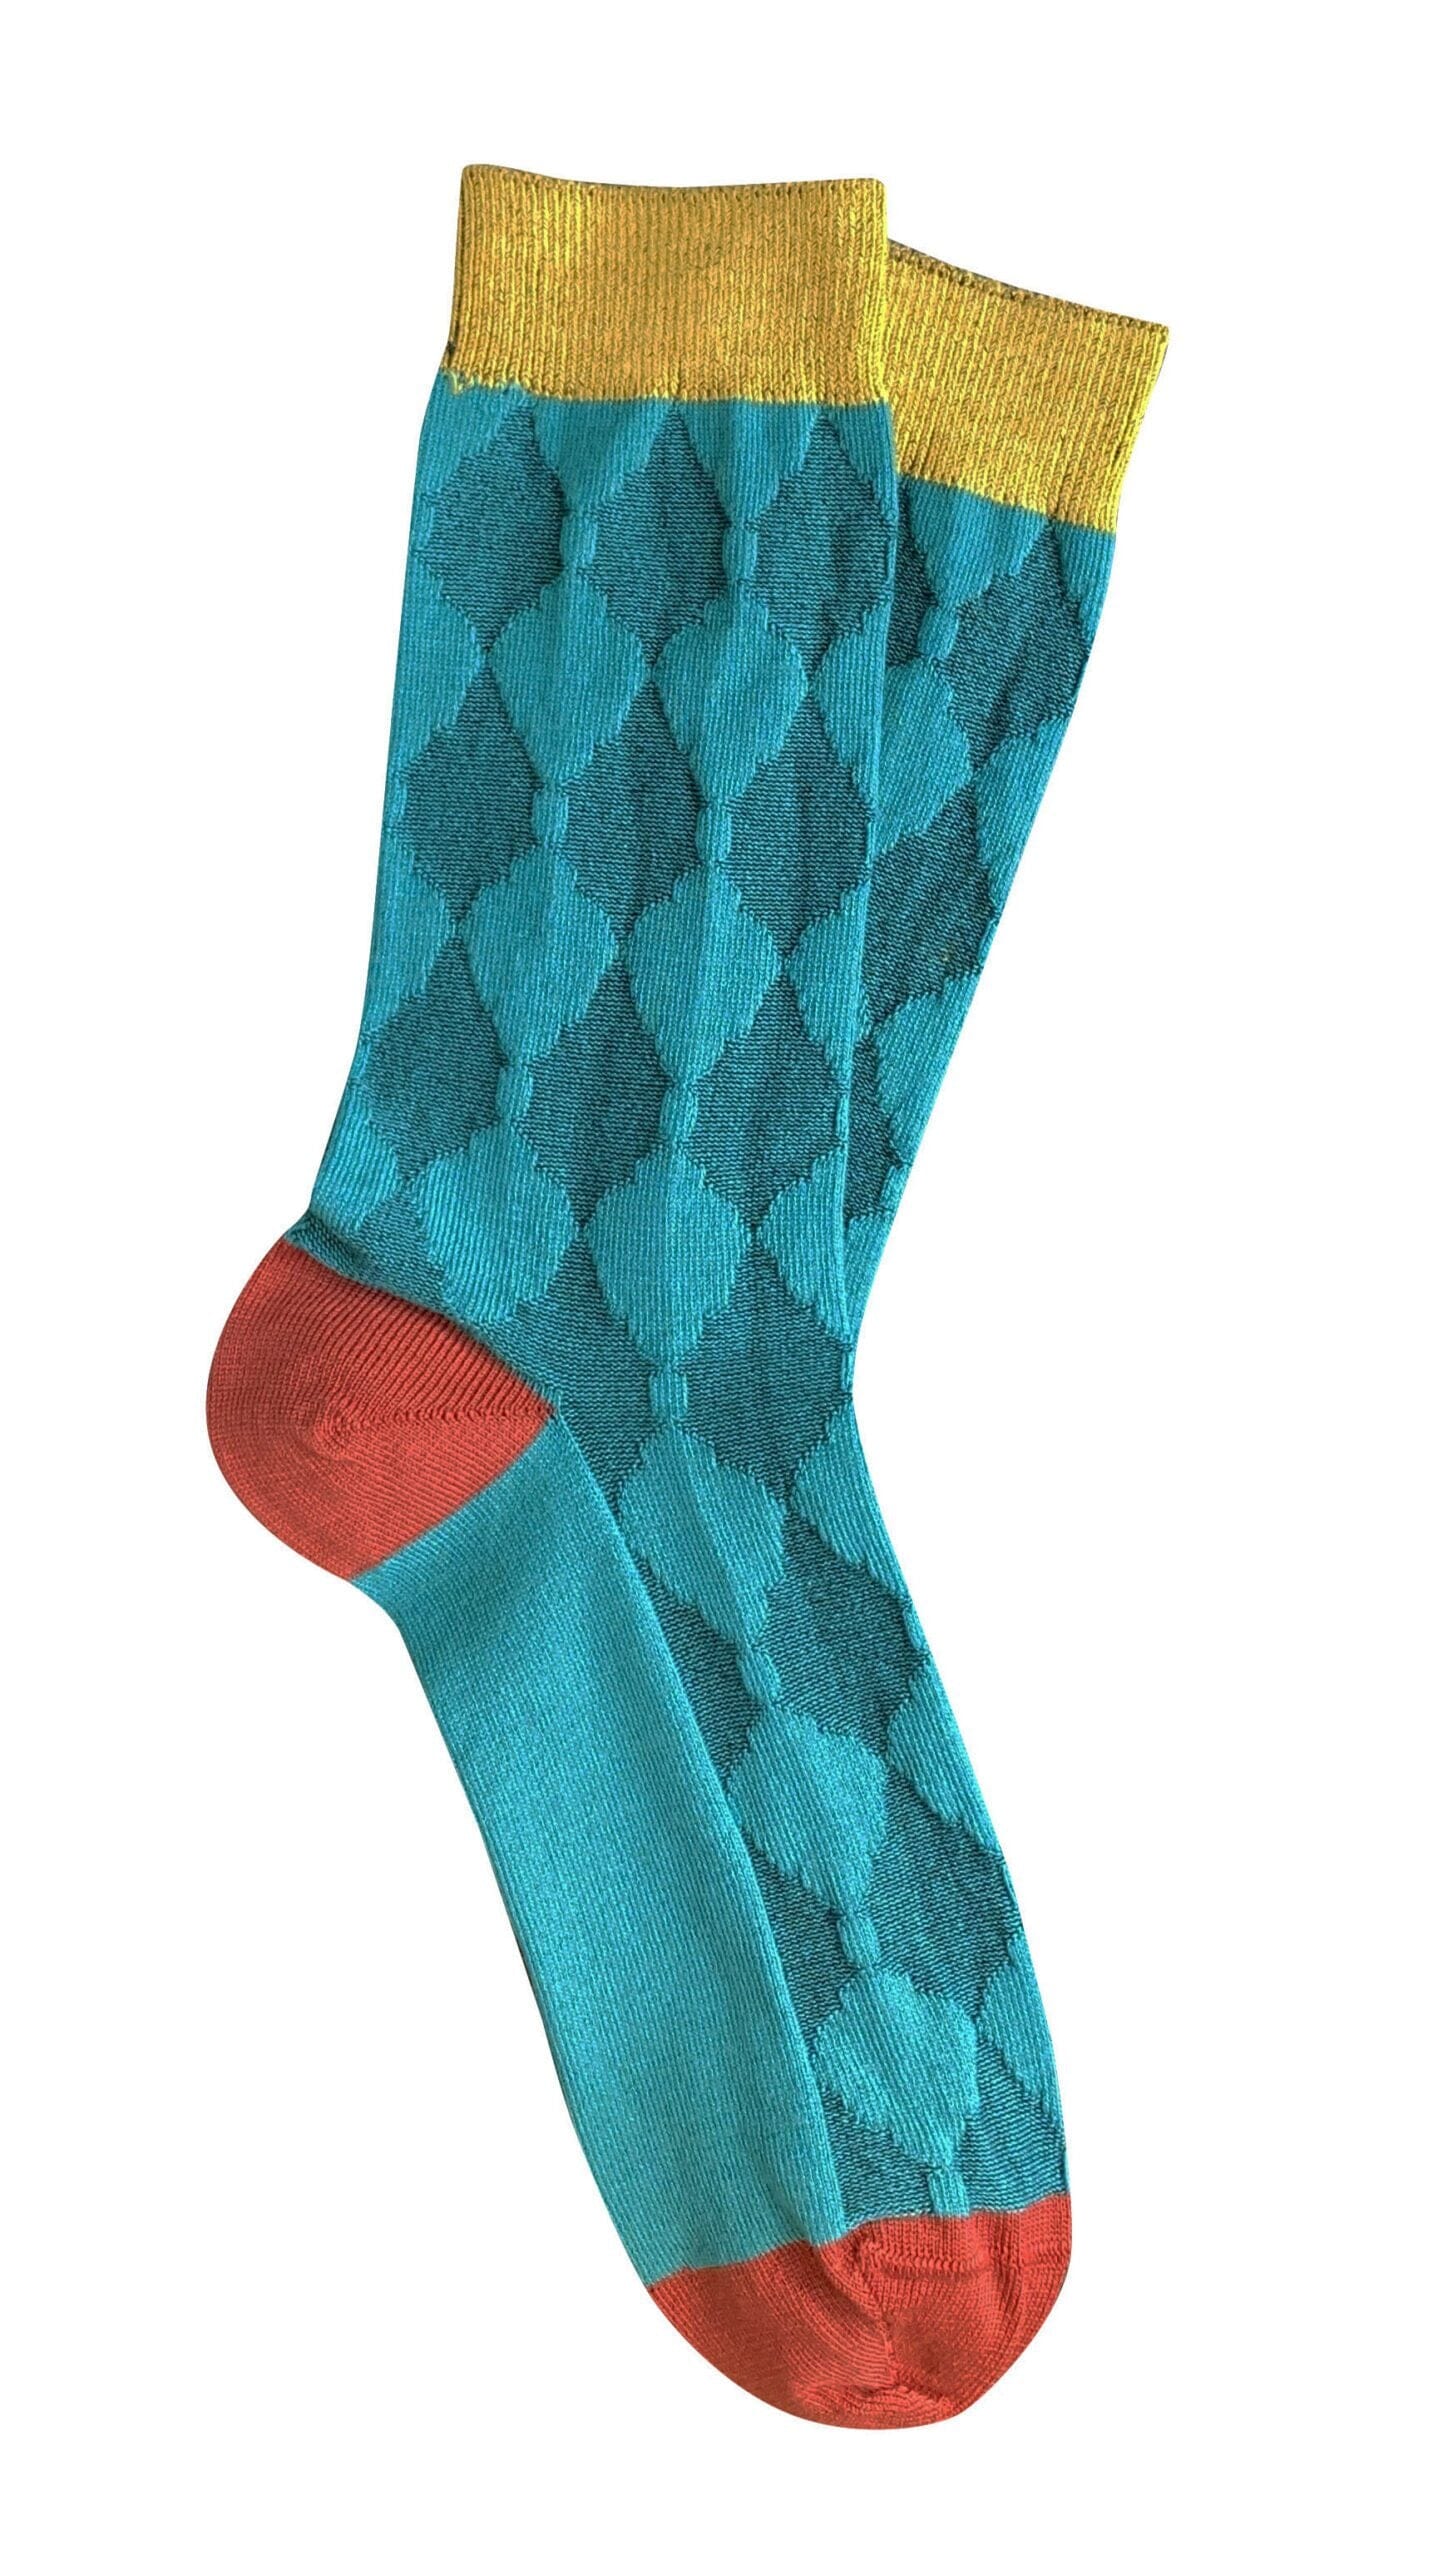 Cotton Aussie Made Socks (Sized) - Tightology socks Tightology Odeon Teal M (W8-11)